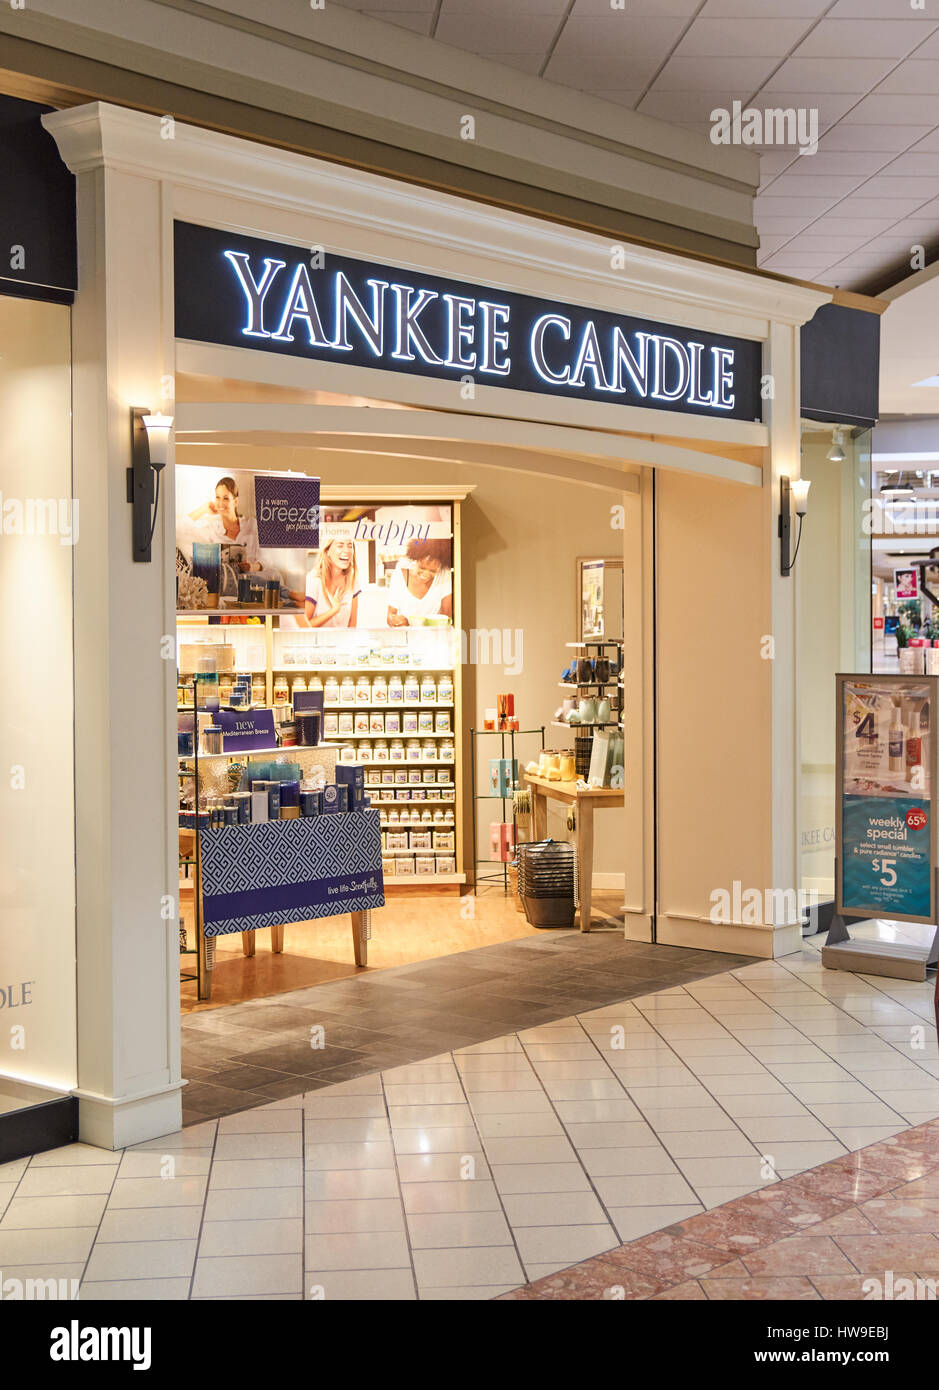 PLATTSBURGH, USA - MARCH 5, 2017 : Yankee Candle bootique. The Yankee Candle Company is an American manufacturer and retailer of scented candles. Stock Photo